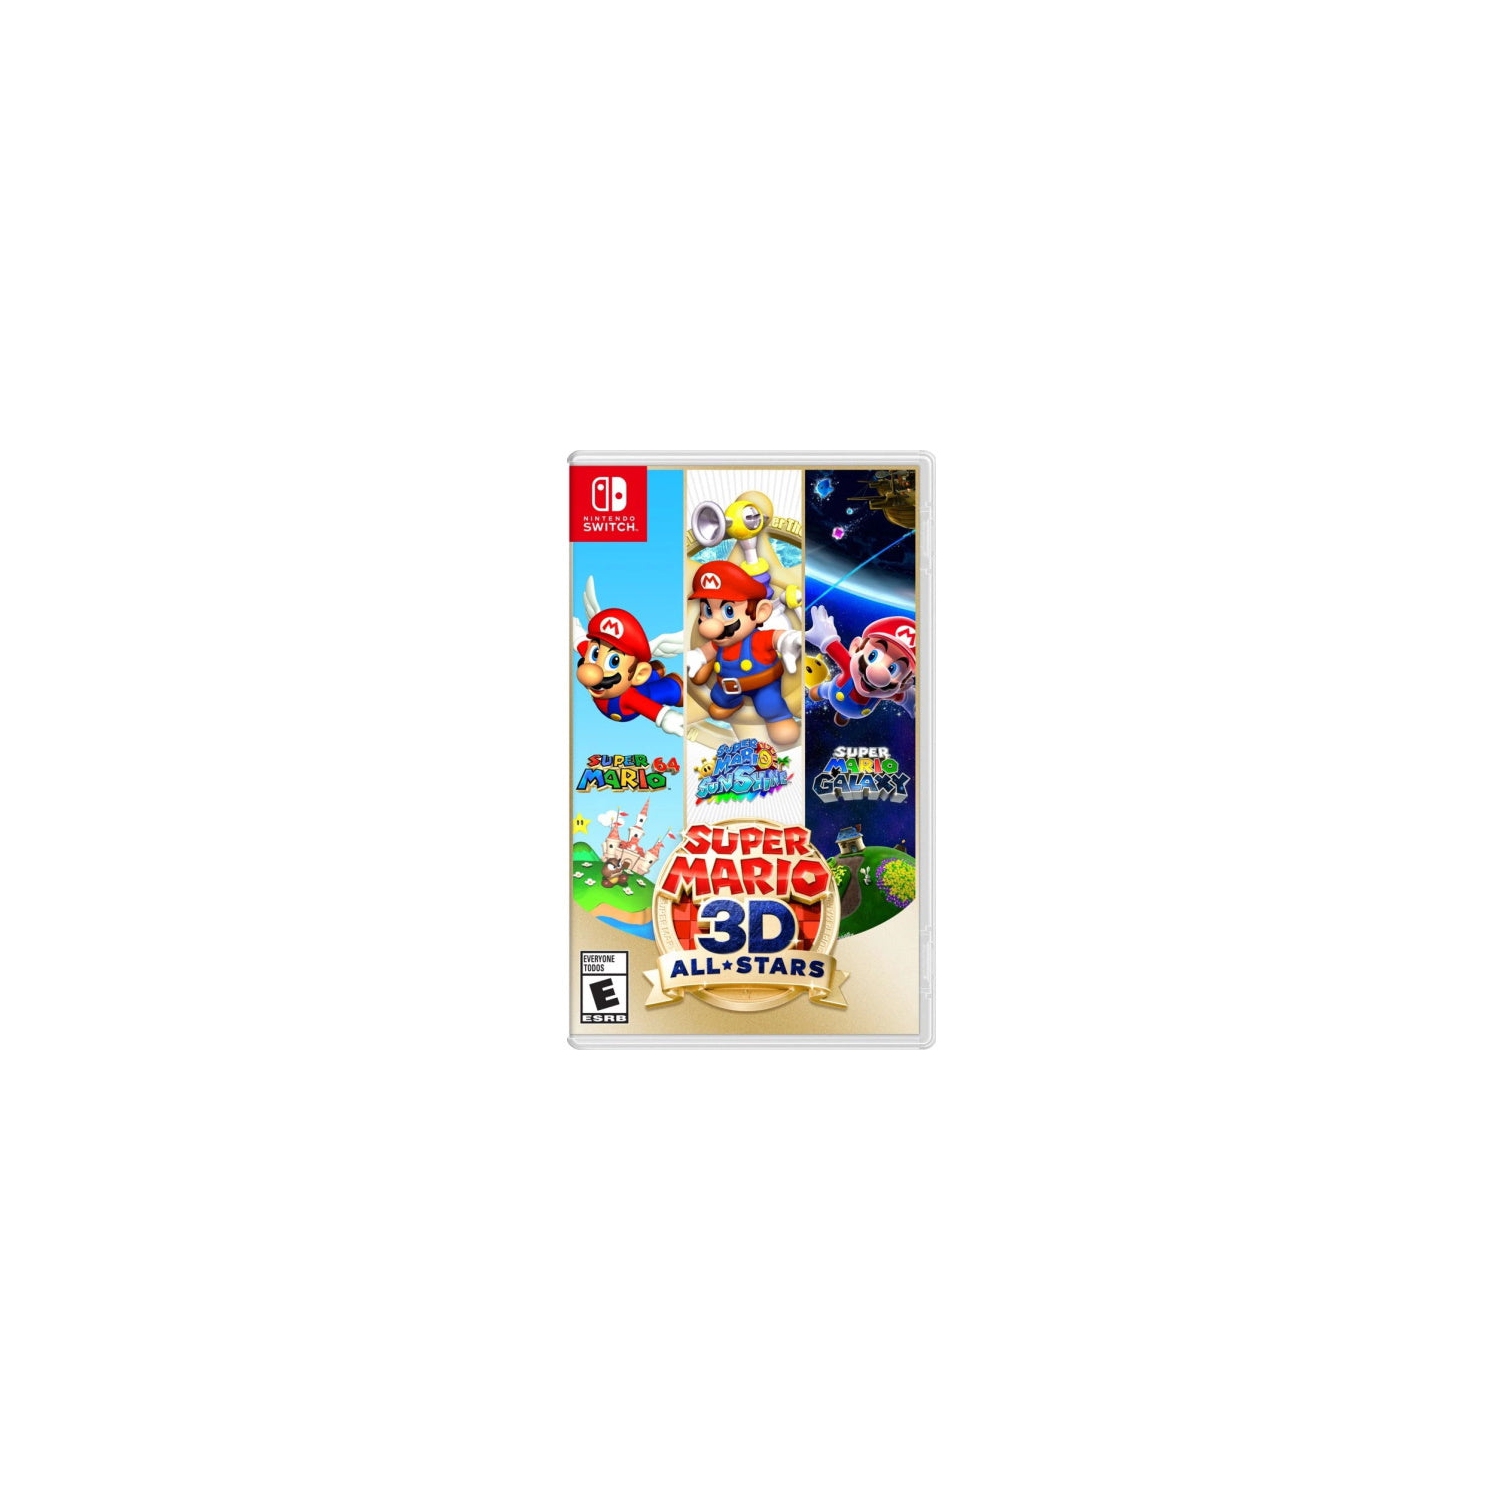 Super Mario 3d Collection - Where to Buy it at the Best Price in Canada?